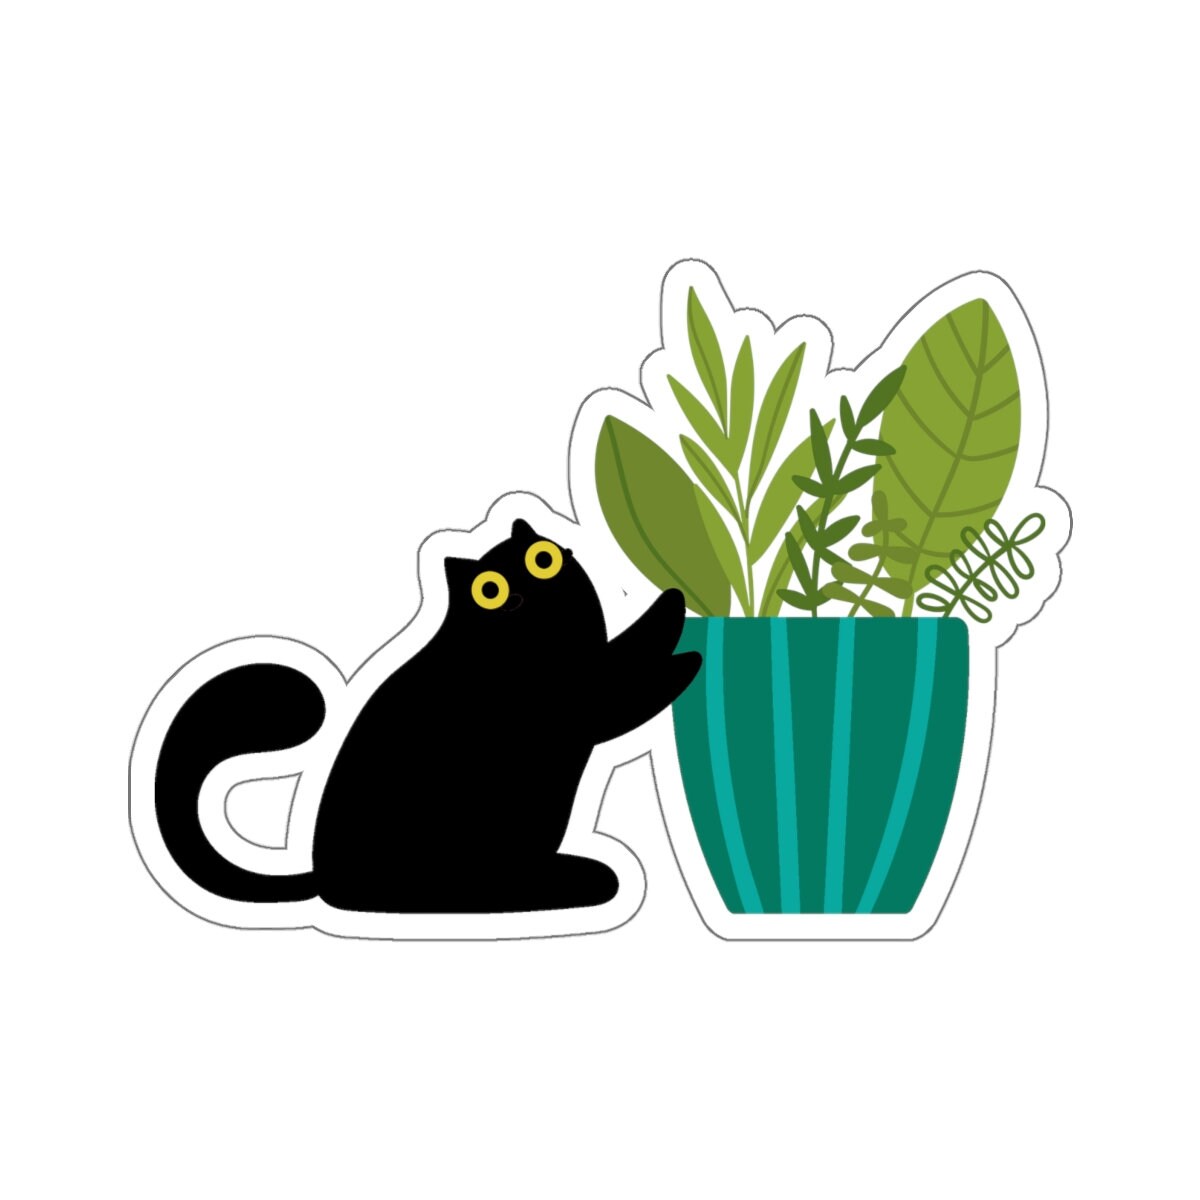 Die-Cut Stickers & Magnets - Cat Themed